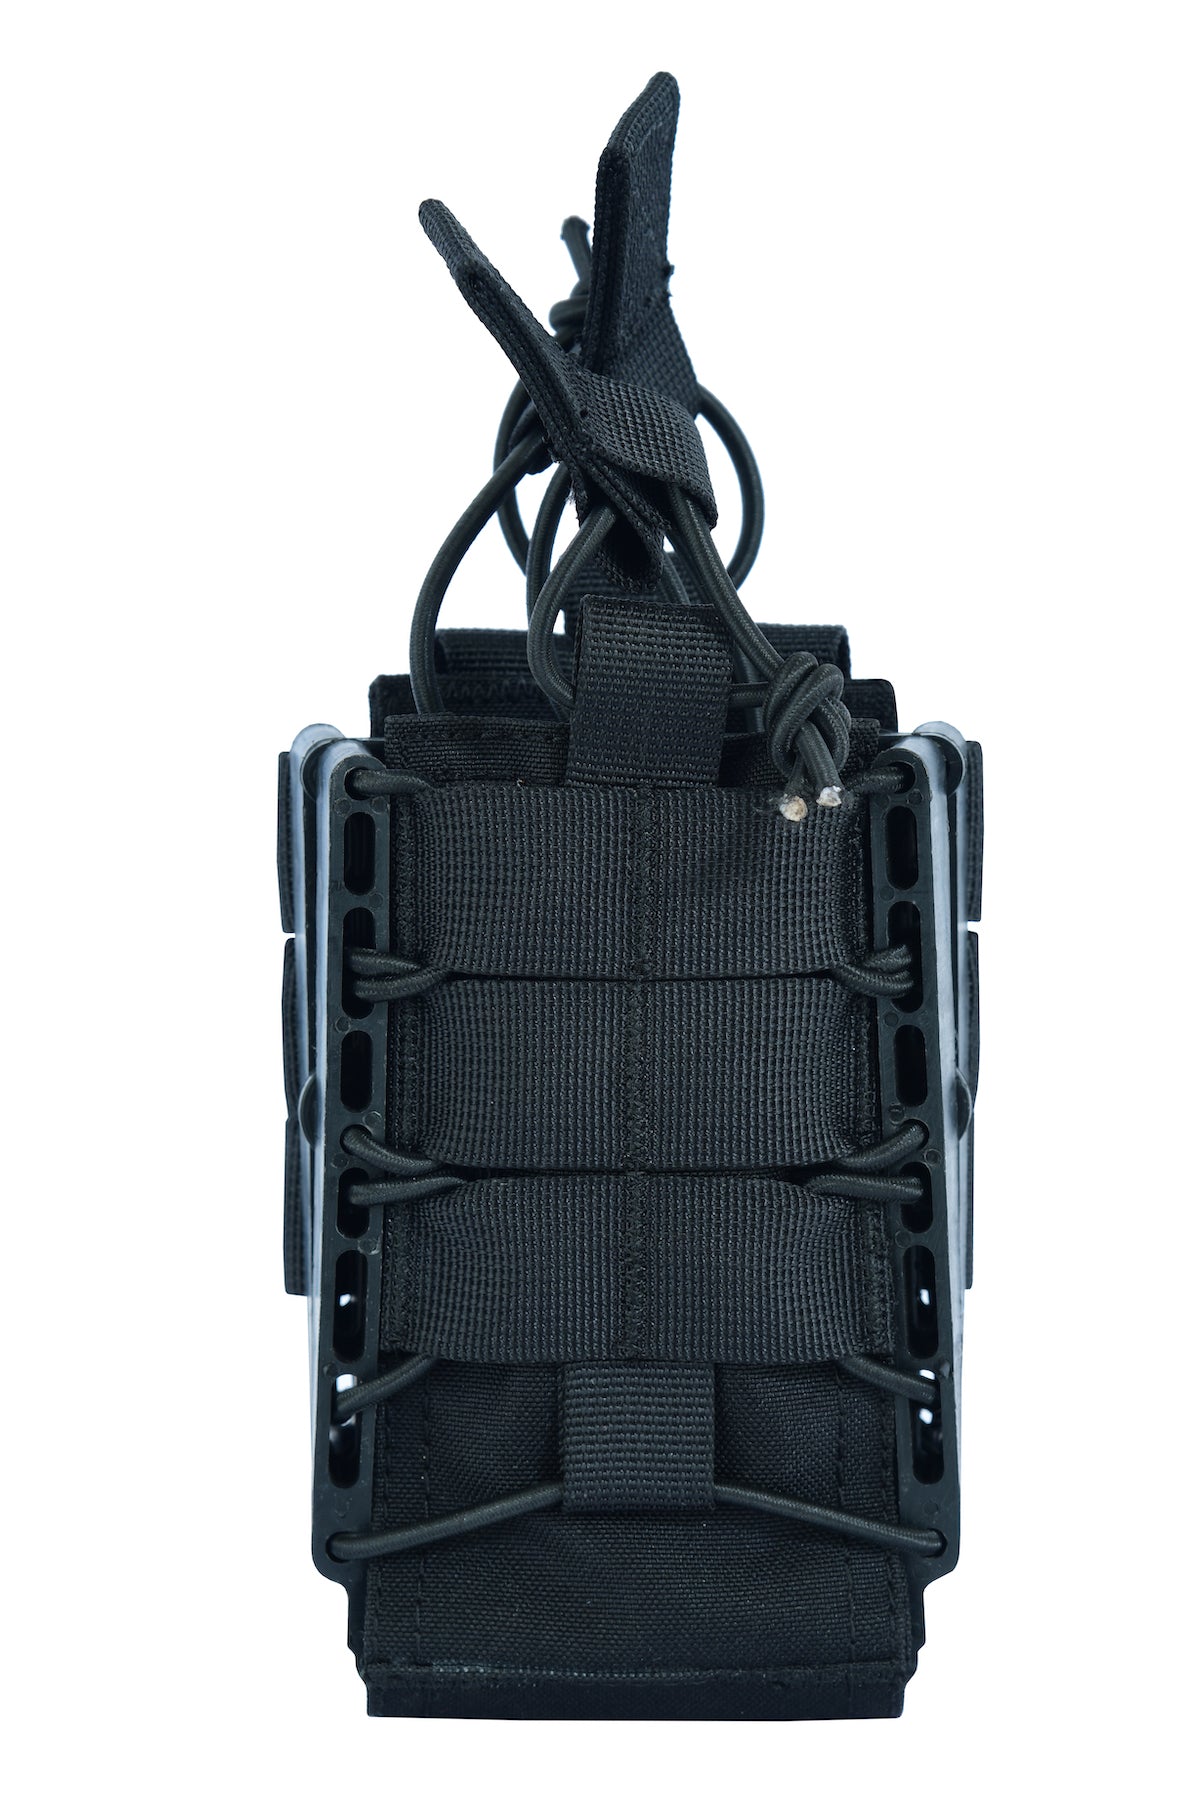 SHE-21020 Rapid Access Double Rifle Magazine Pouch